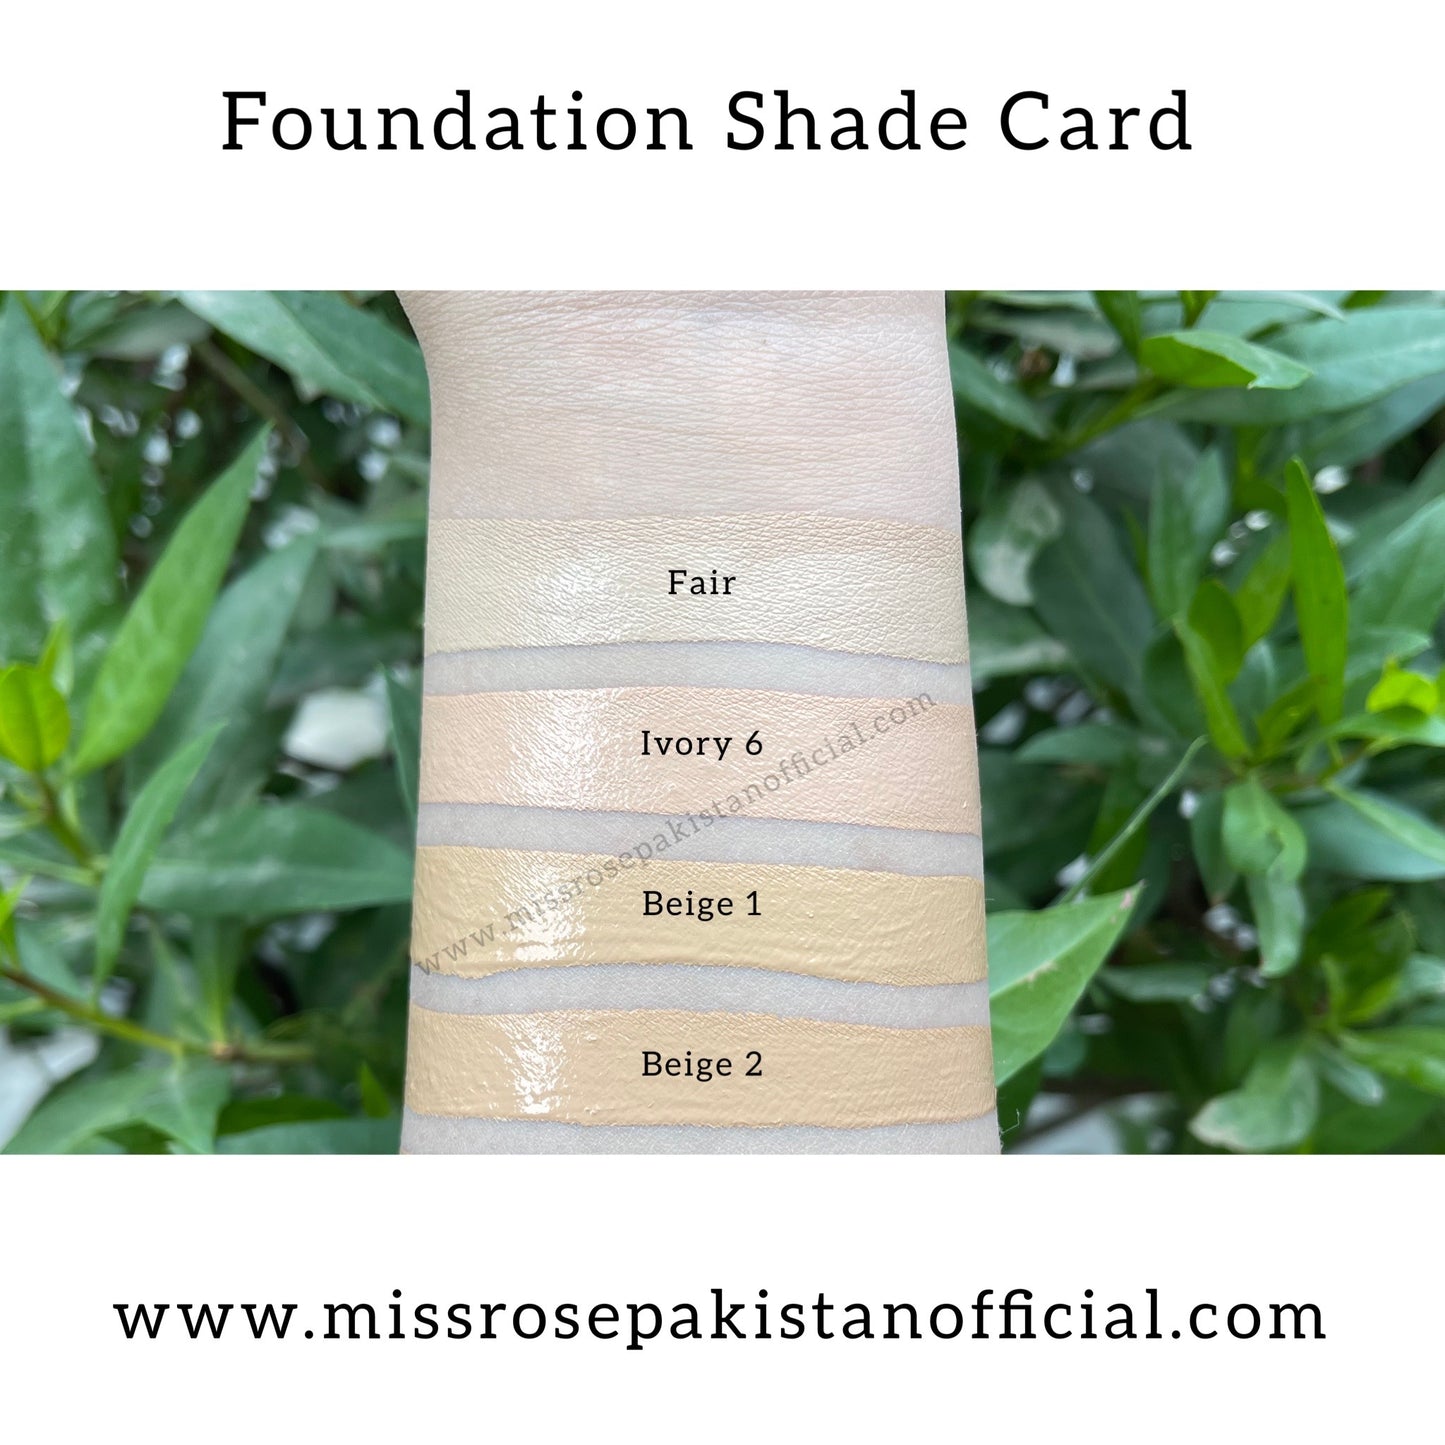 Miss Rose Pure Stay Foundation